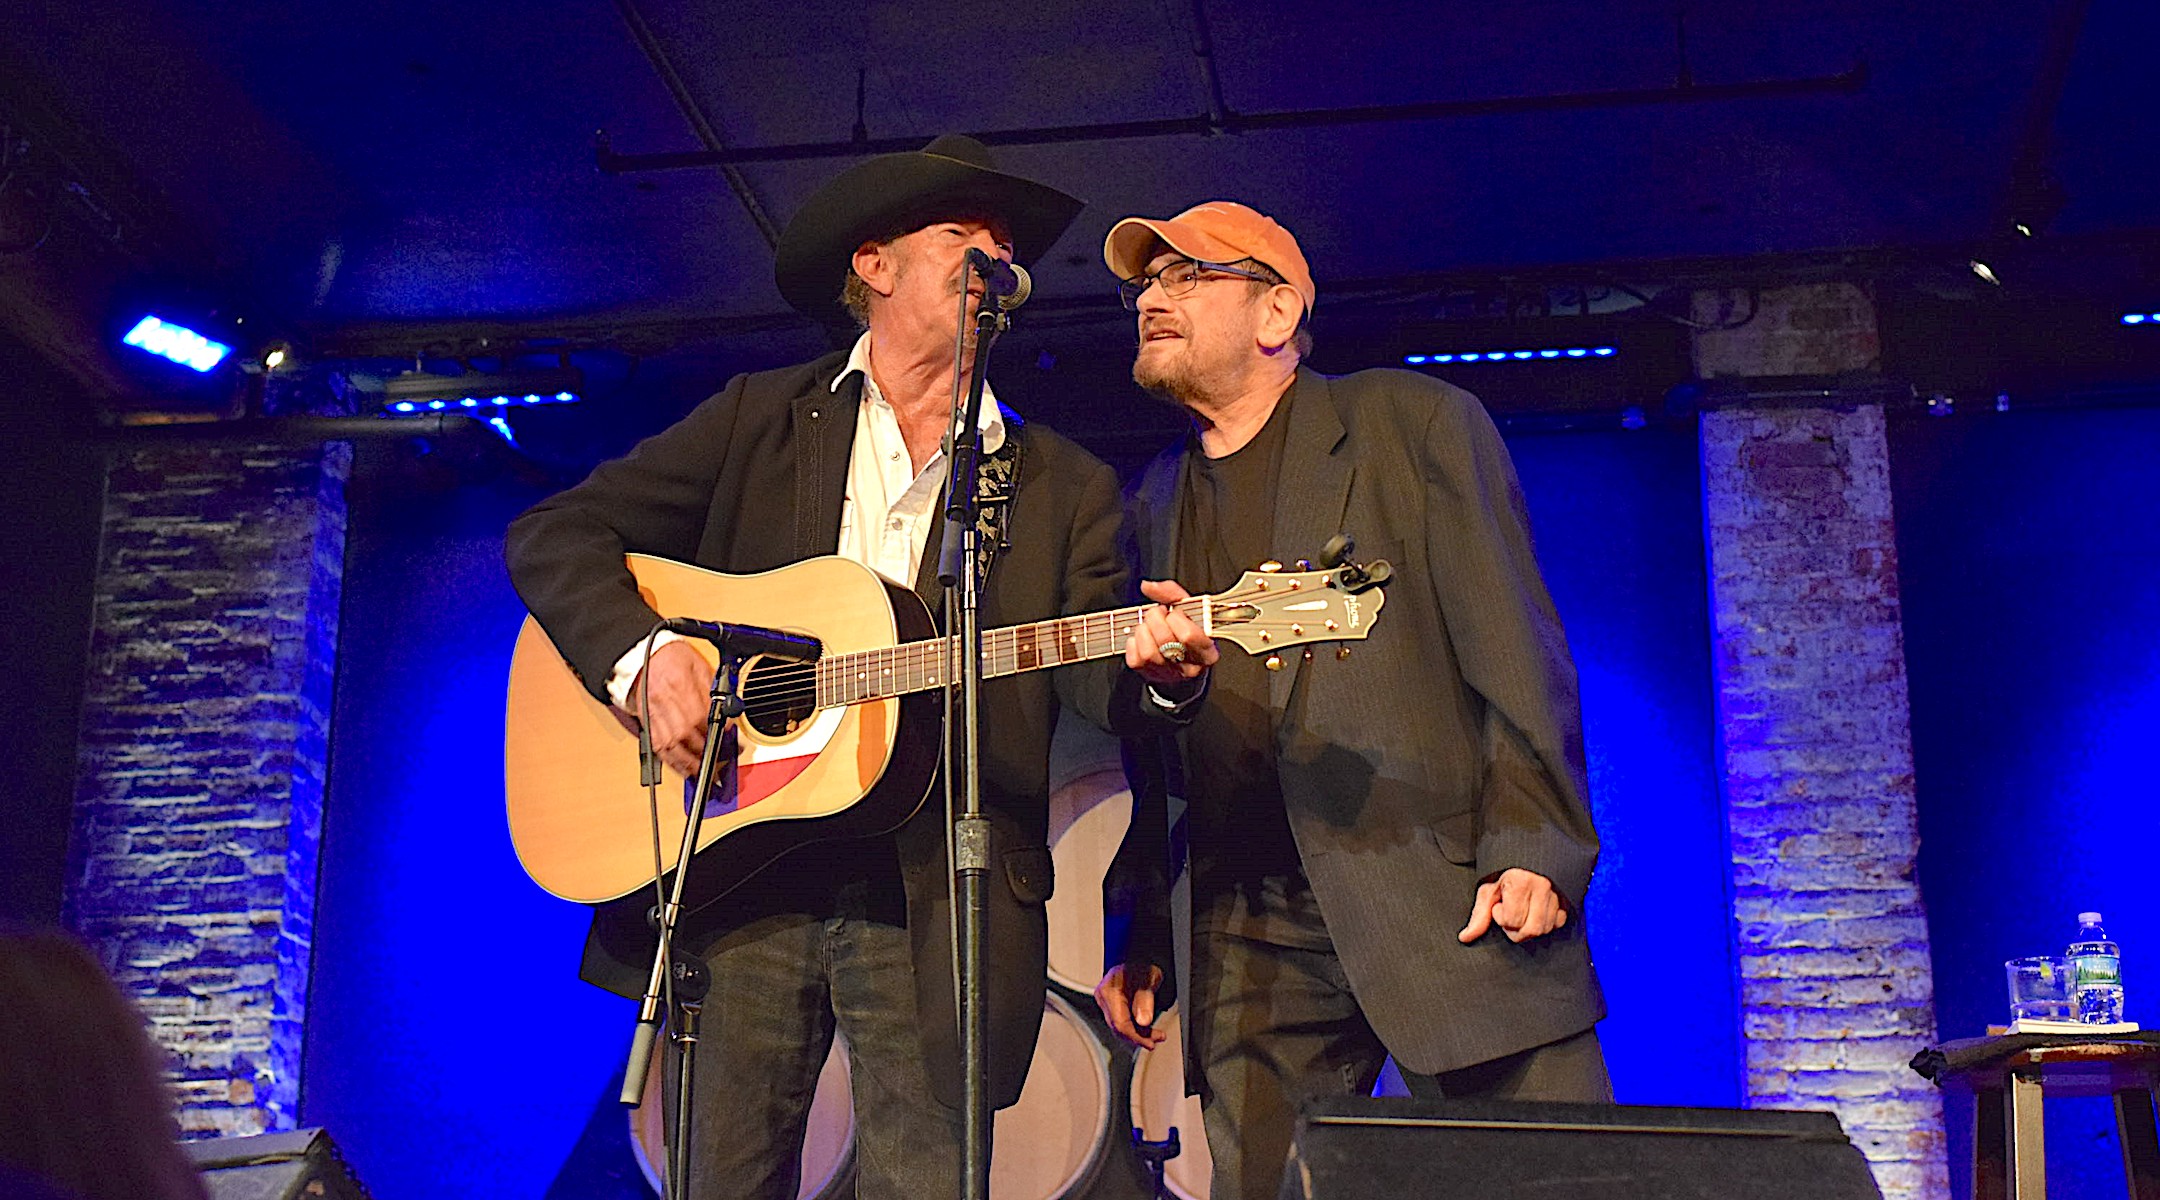 Nathan “Chinga” Chavin, right, and Kinky Friedman perform together in an undated photo. The two were frat brothers at the University of Texas. (Courtesy Brandi Chavin)